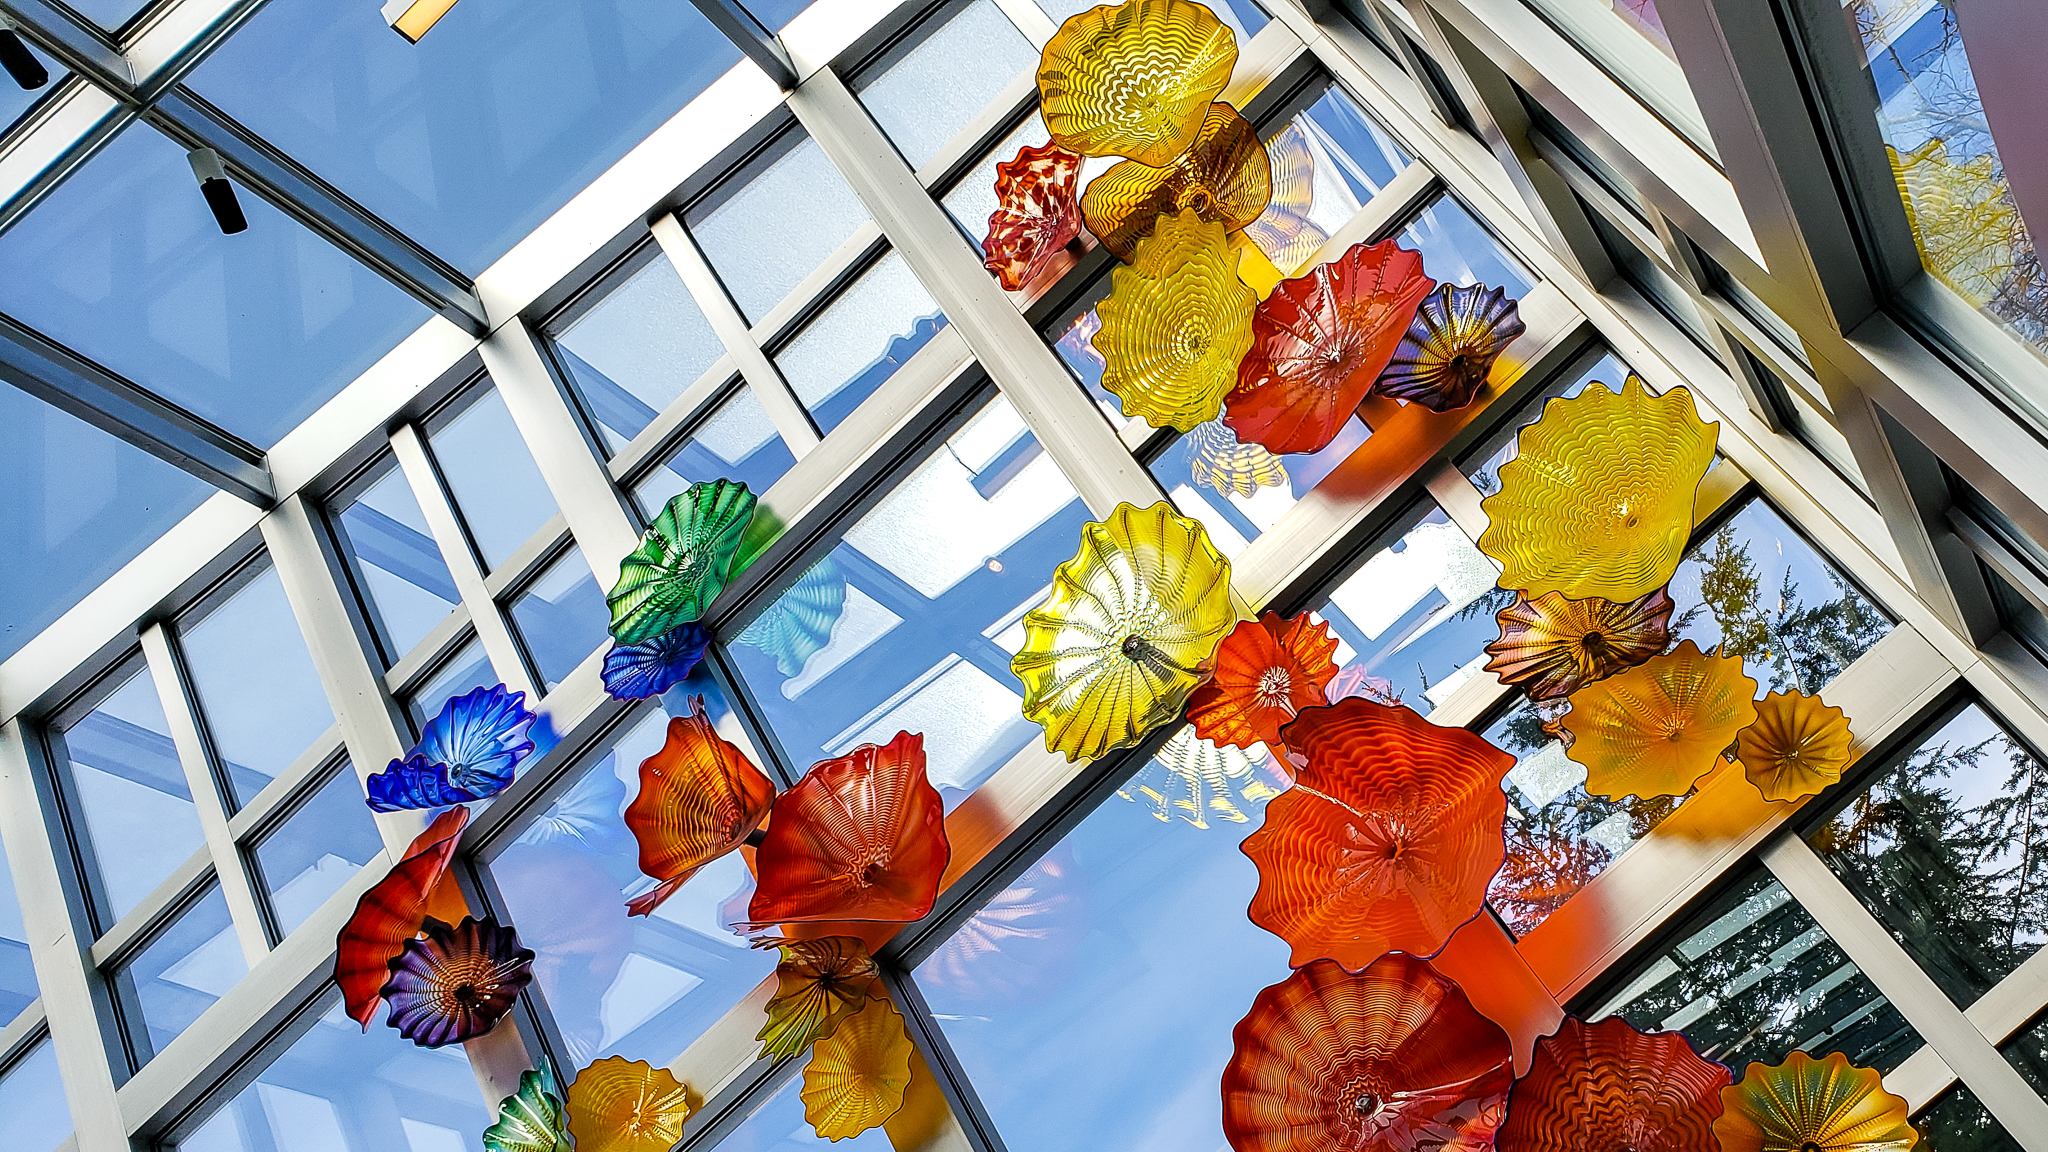 Sunny skies and Chihuly 